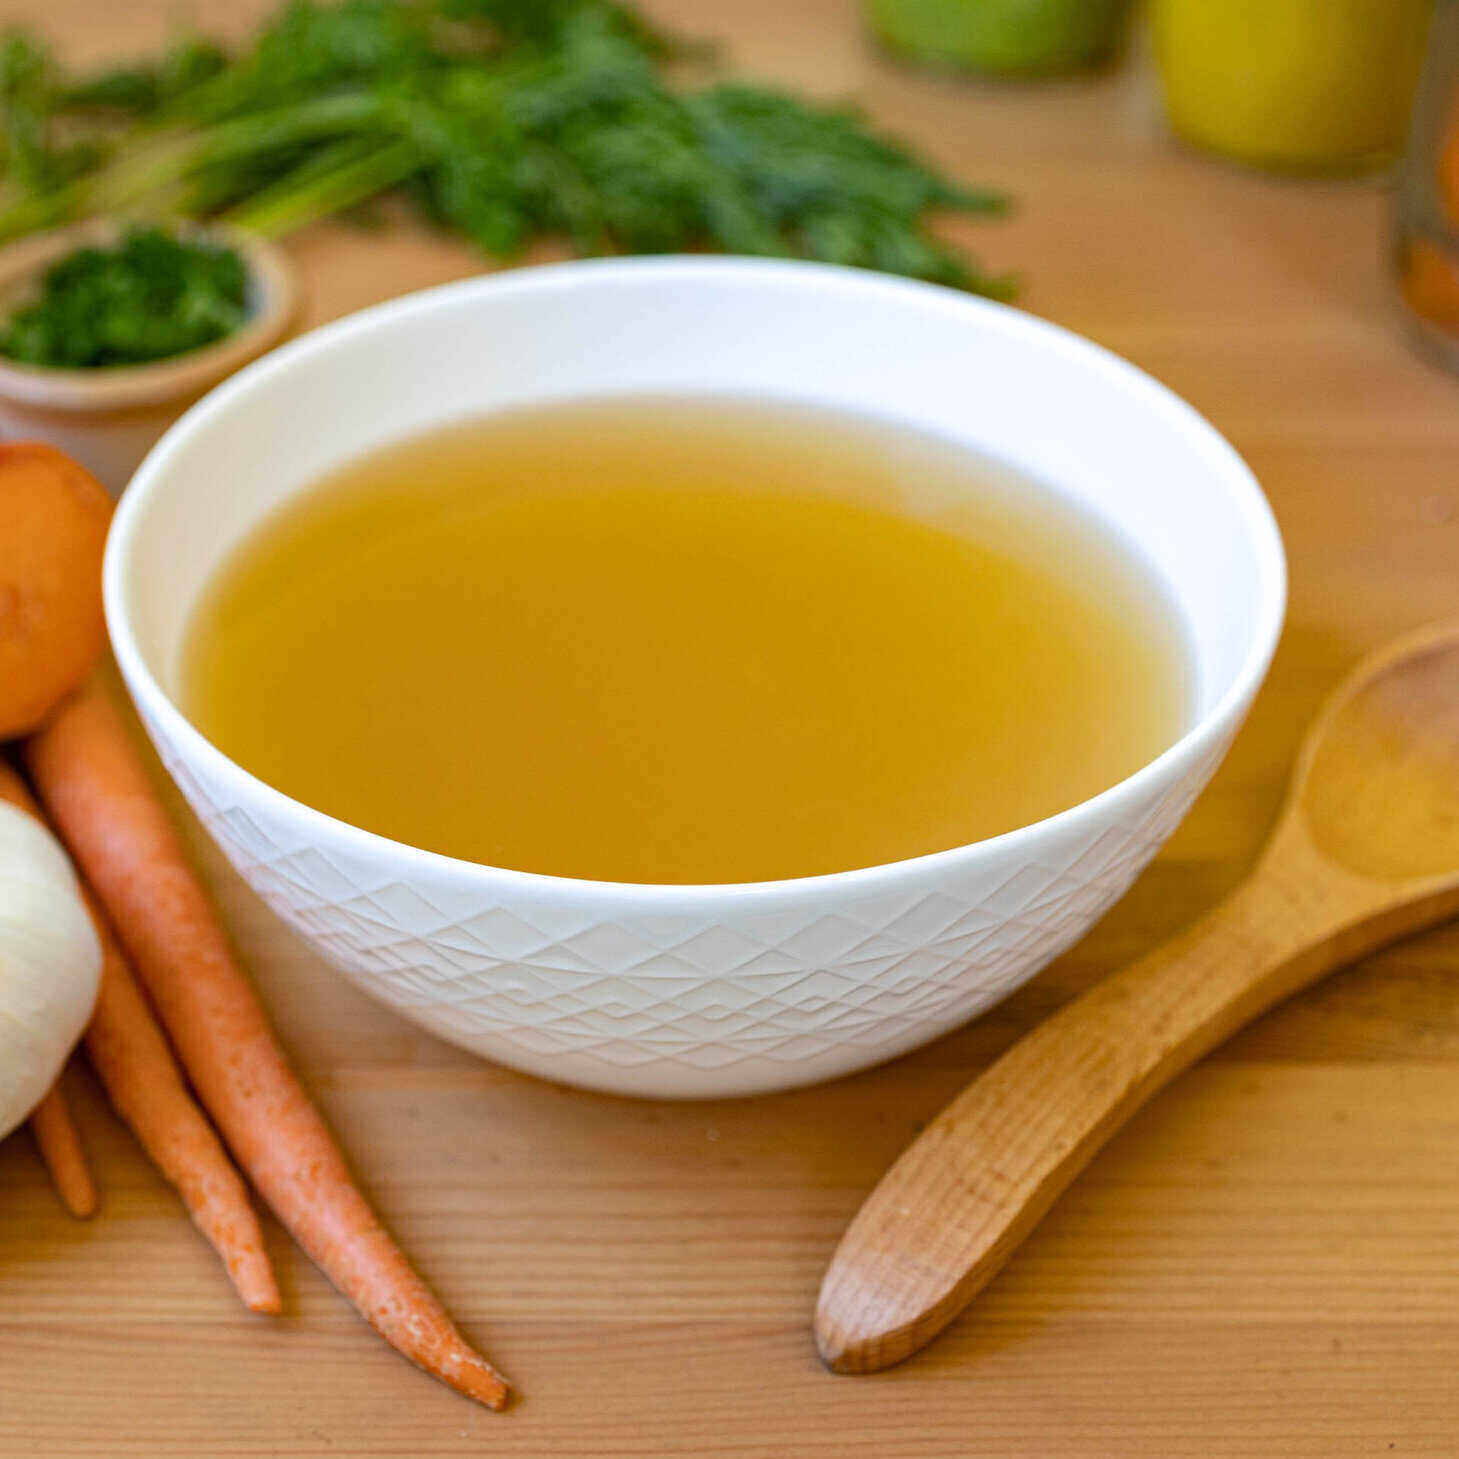 A white ceramic bowl with a geometric design sits in the middle of the photo on a wood table with a wooden spoon on its right and a bunch of herbs on its left. The soup is vegetable broth - so a clear brown liquid.